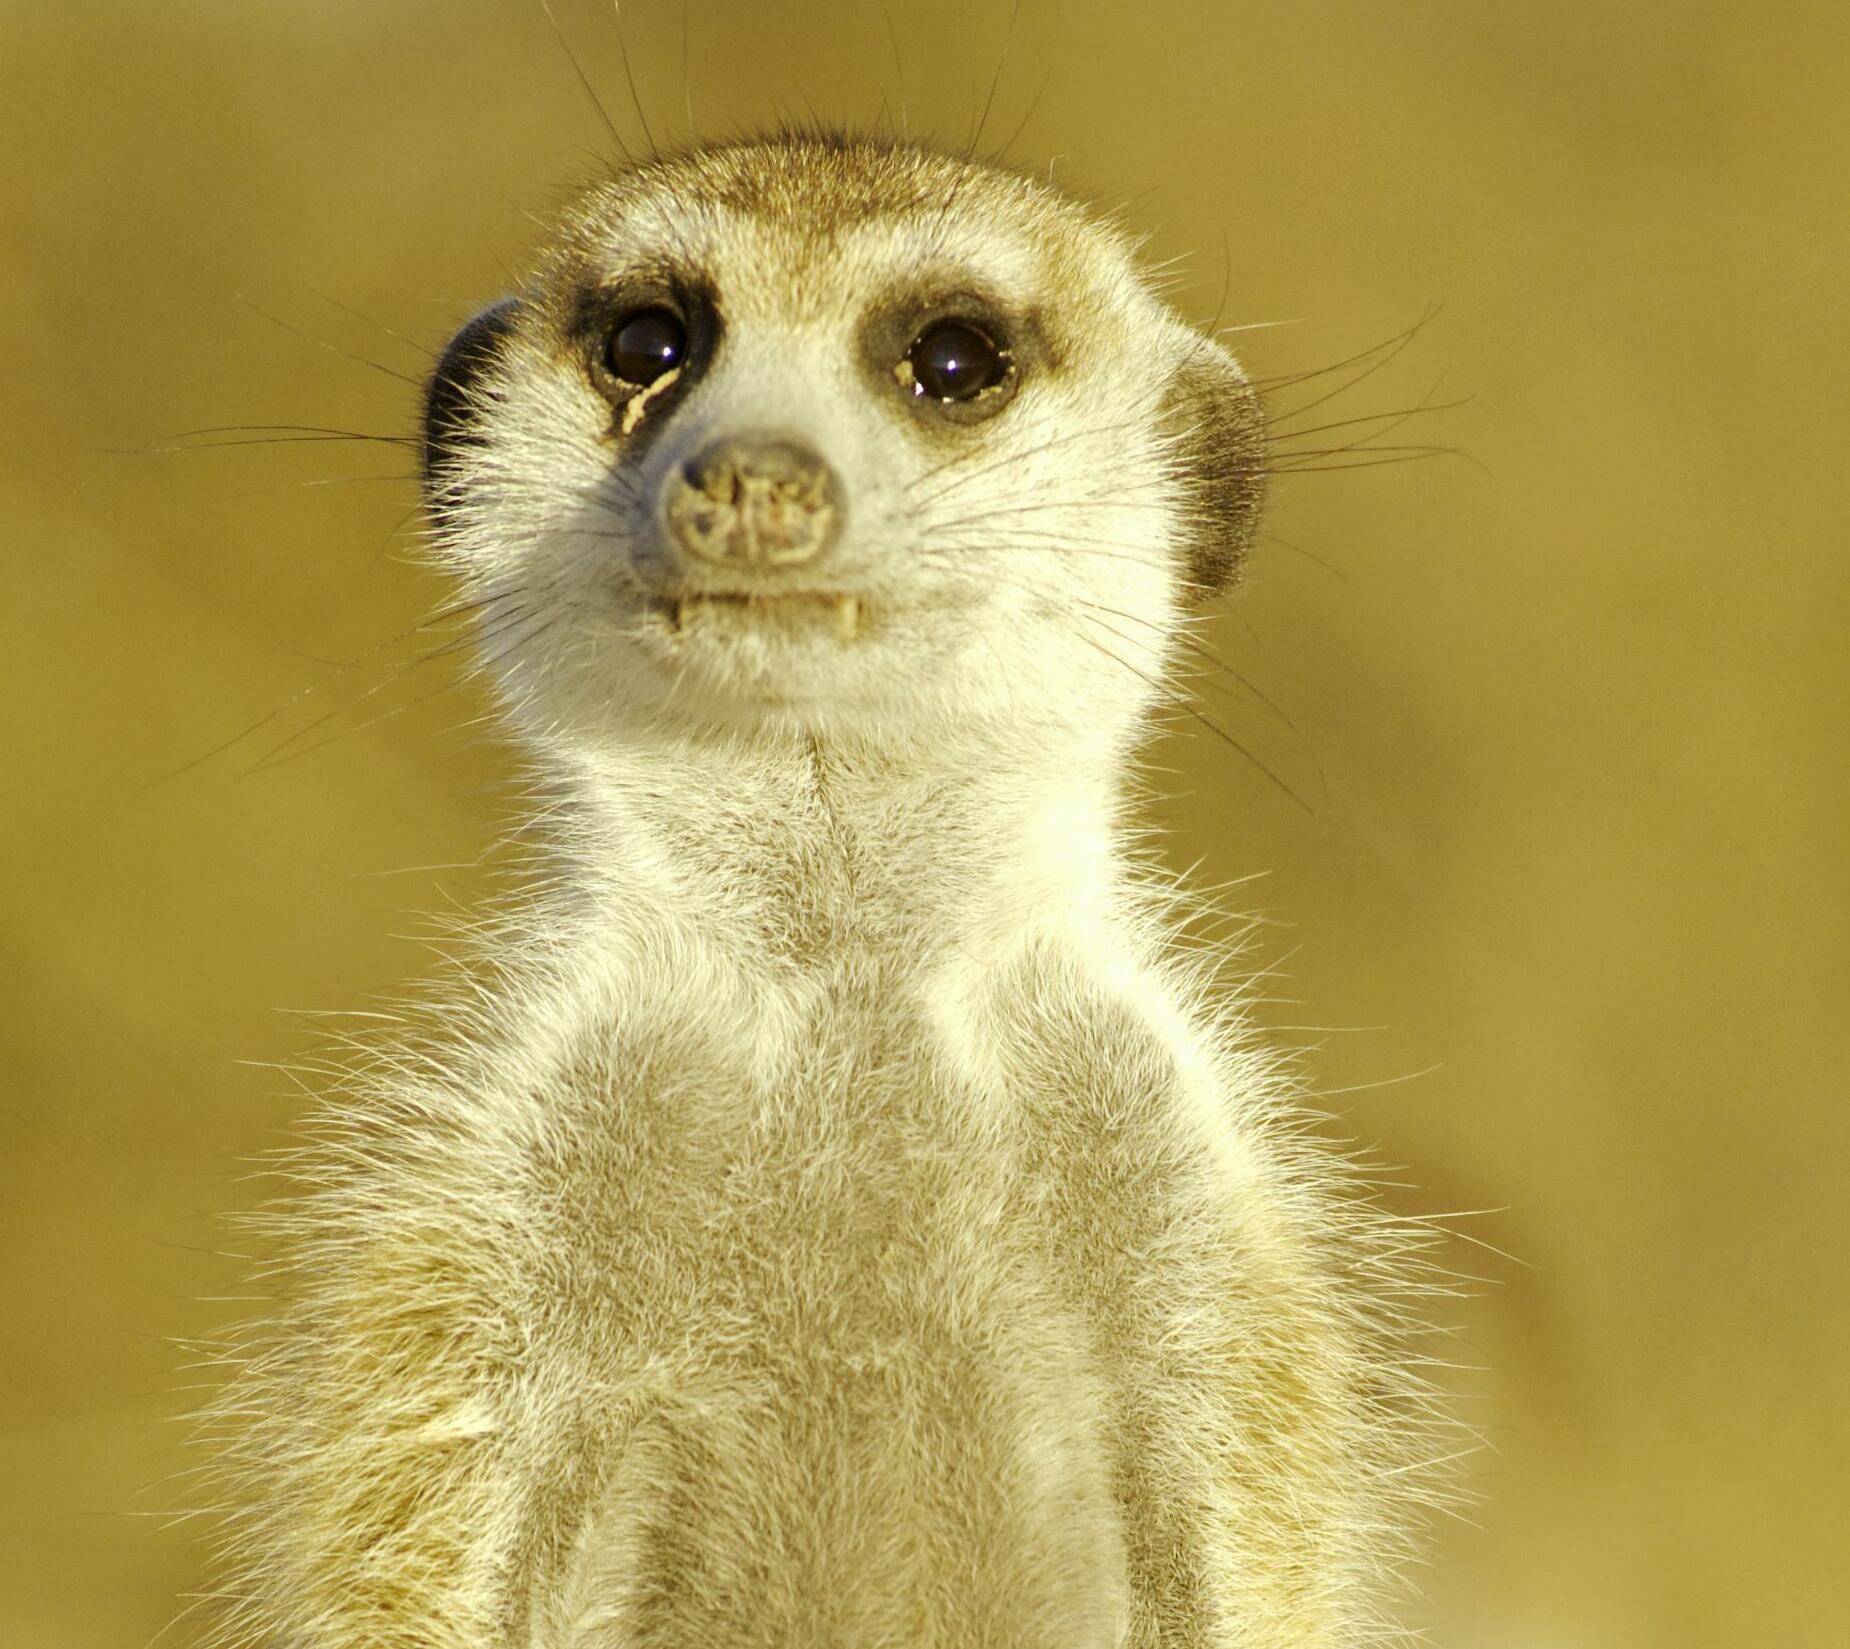 Cover image for  article: "The Science of Meerkat Manor" and More TiVoWorthy TV for May 30